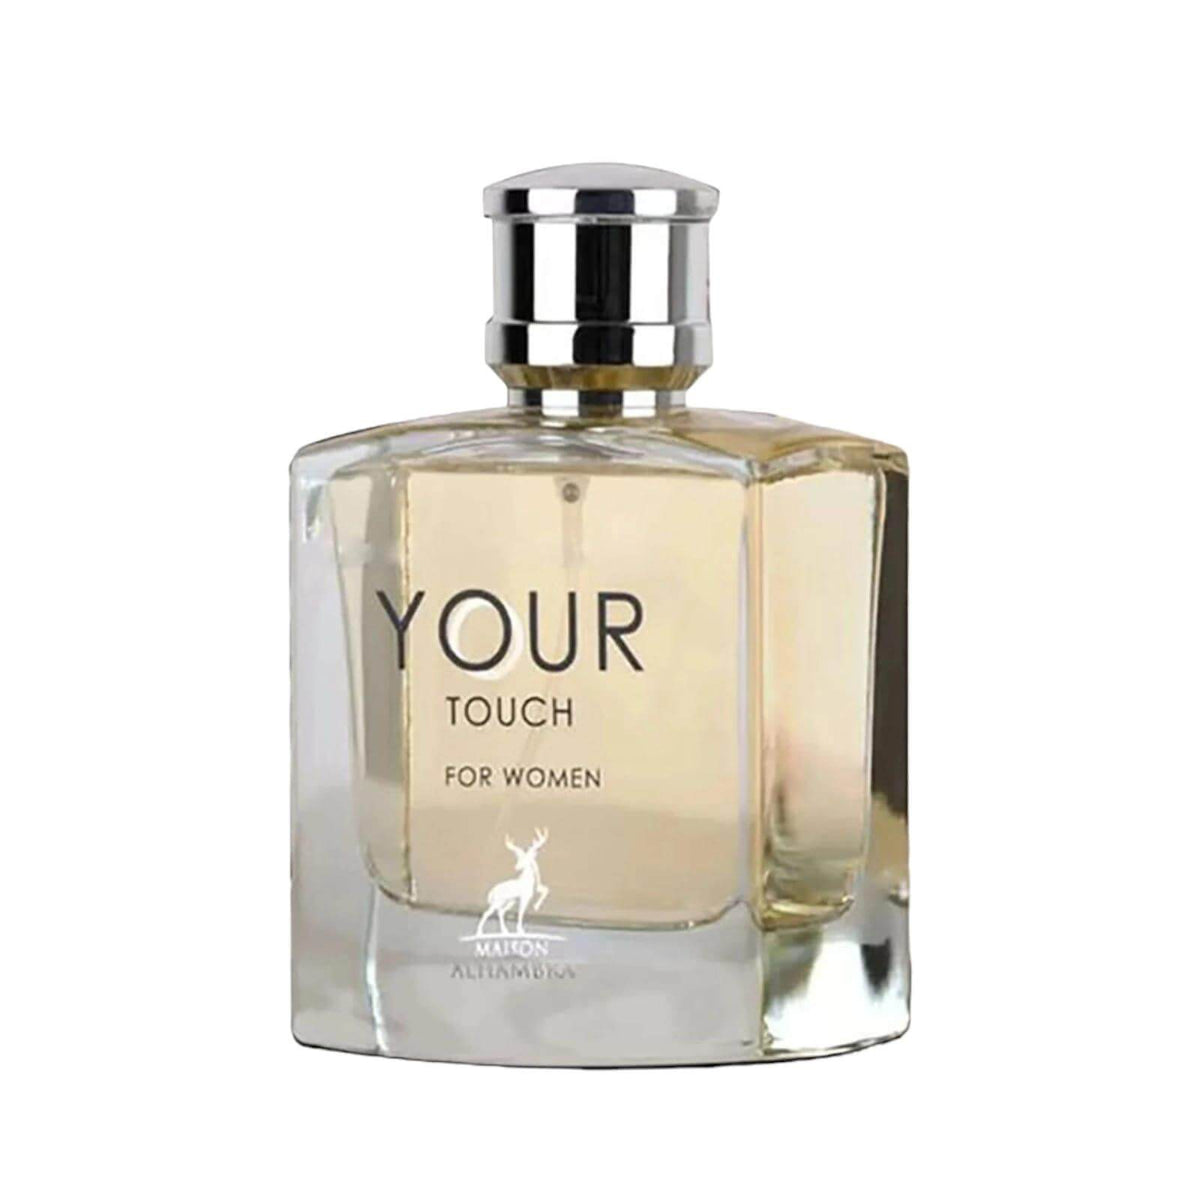 Your Touch 100Ml Mujer Maison Alhambra Perfume